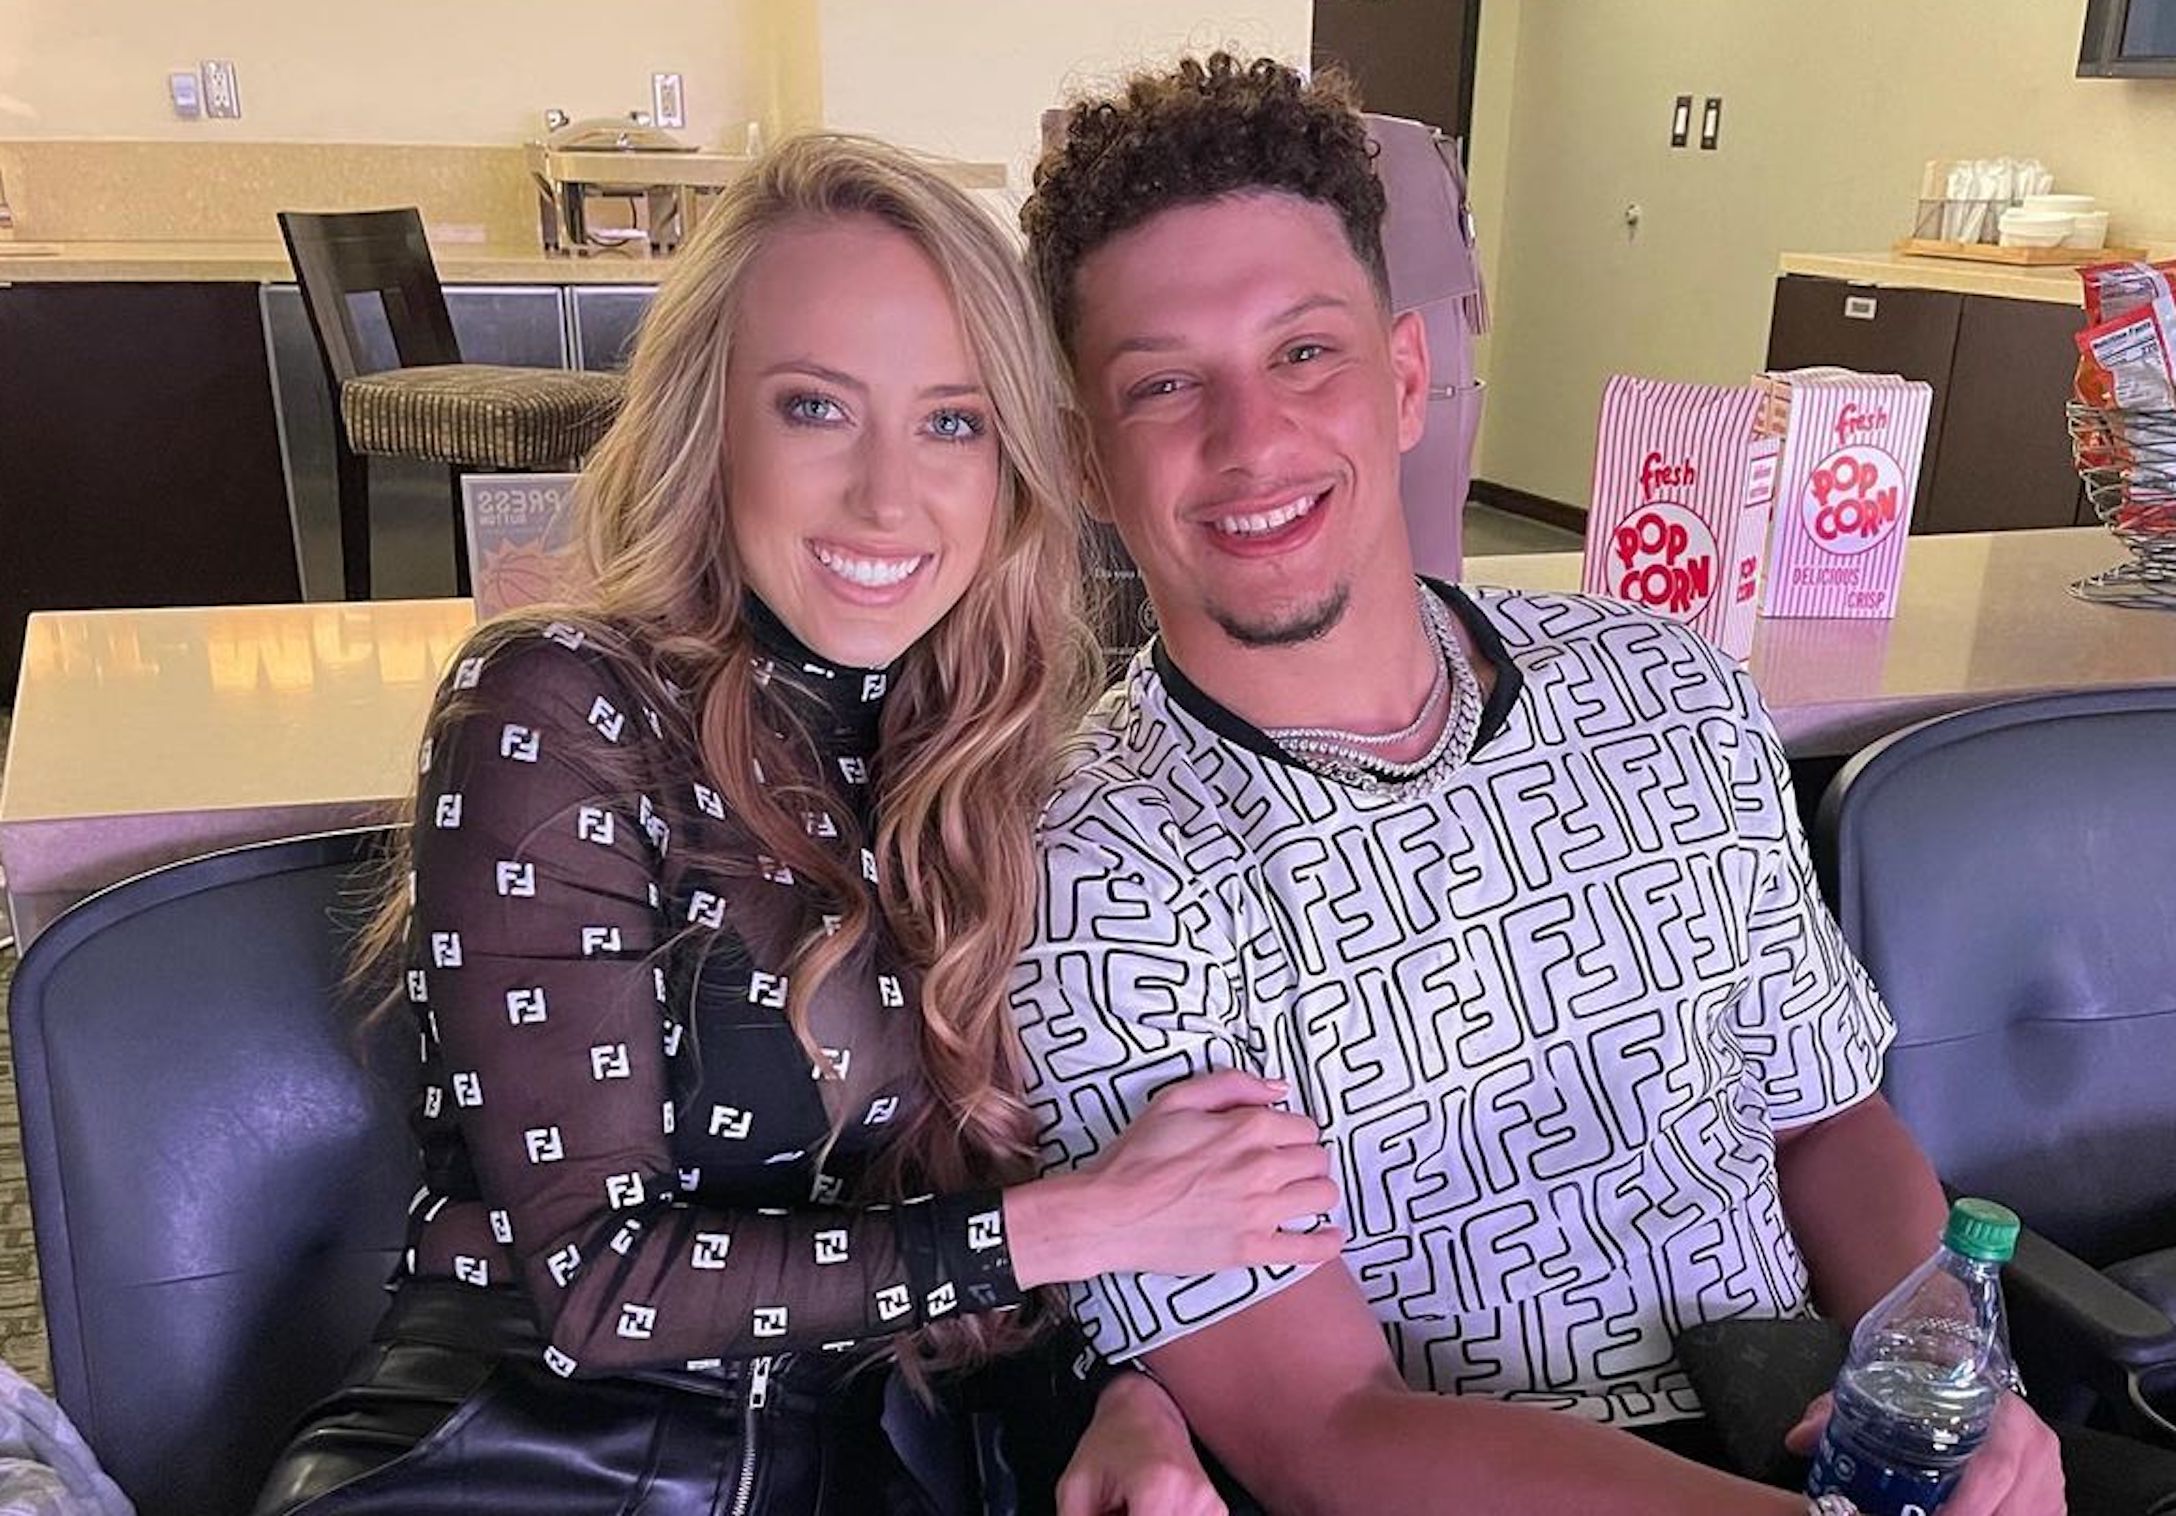 Patrick Mahomes' Fiancee Brittany Matthews Works Out With Baby: Video